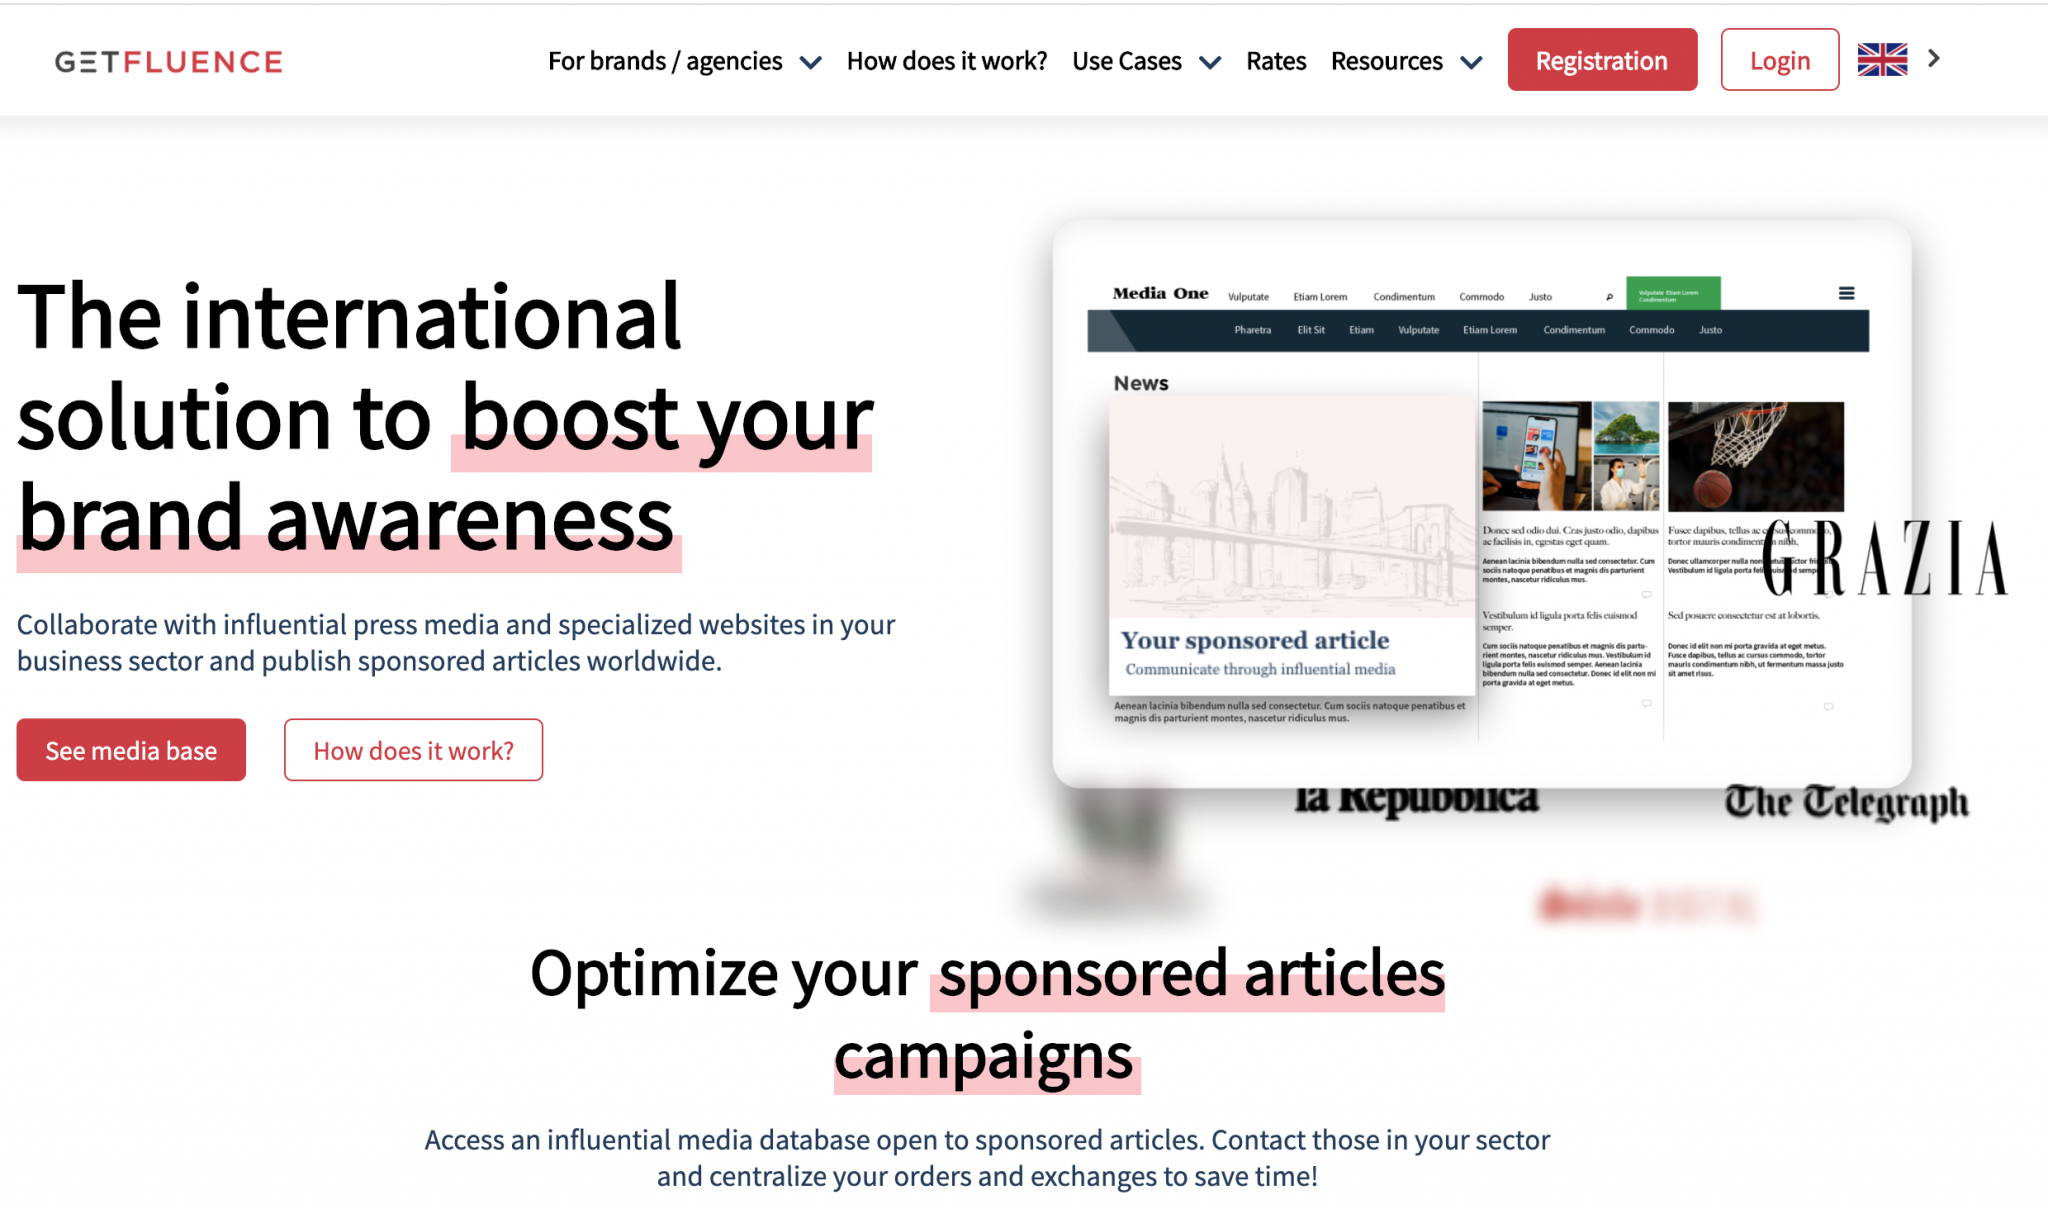 getfluence website homepage about sponsored articles